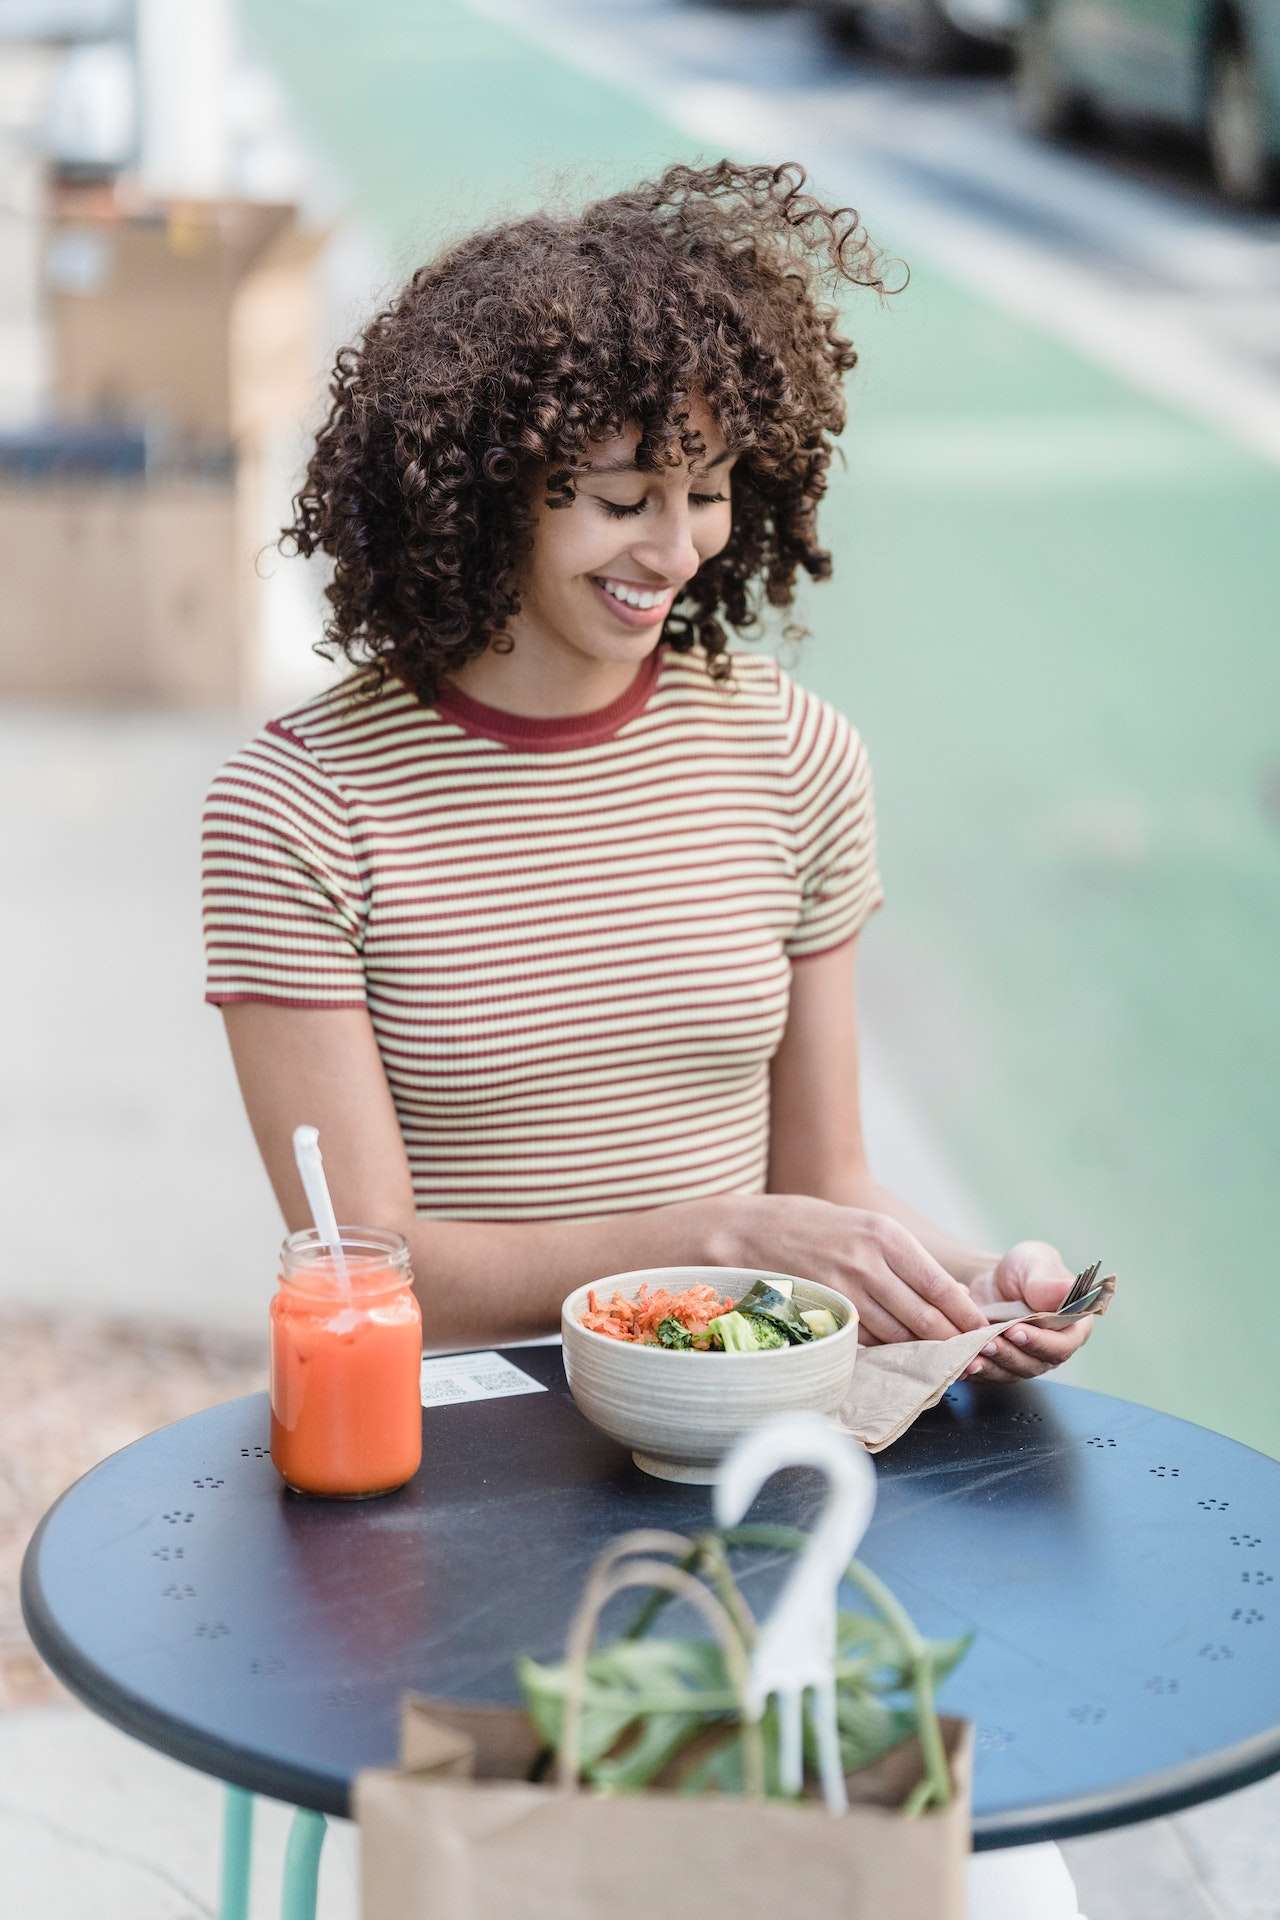 Smiling ethnic woman with vegetable salad and smoothie in cafe